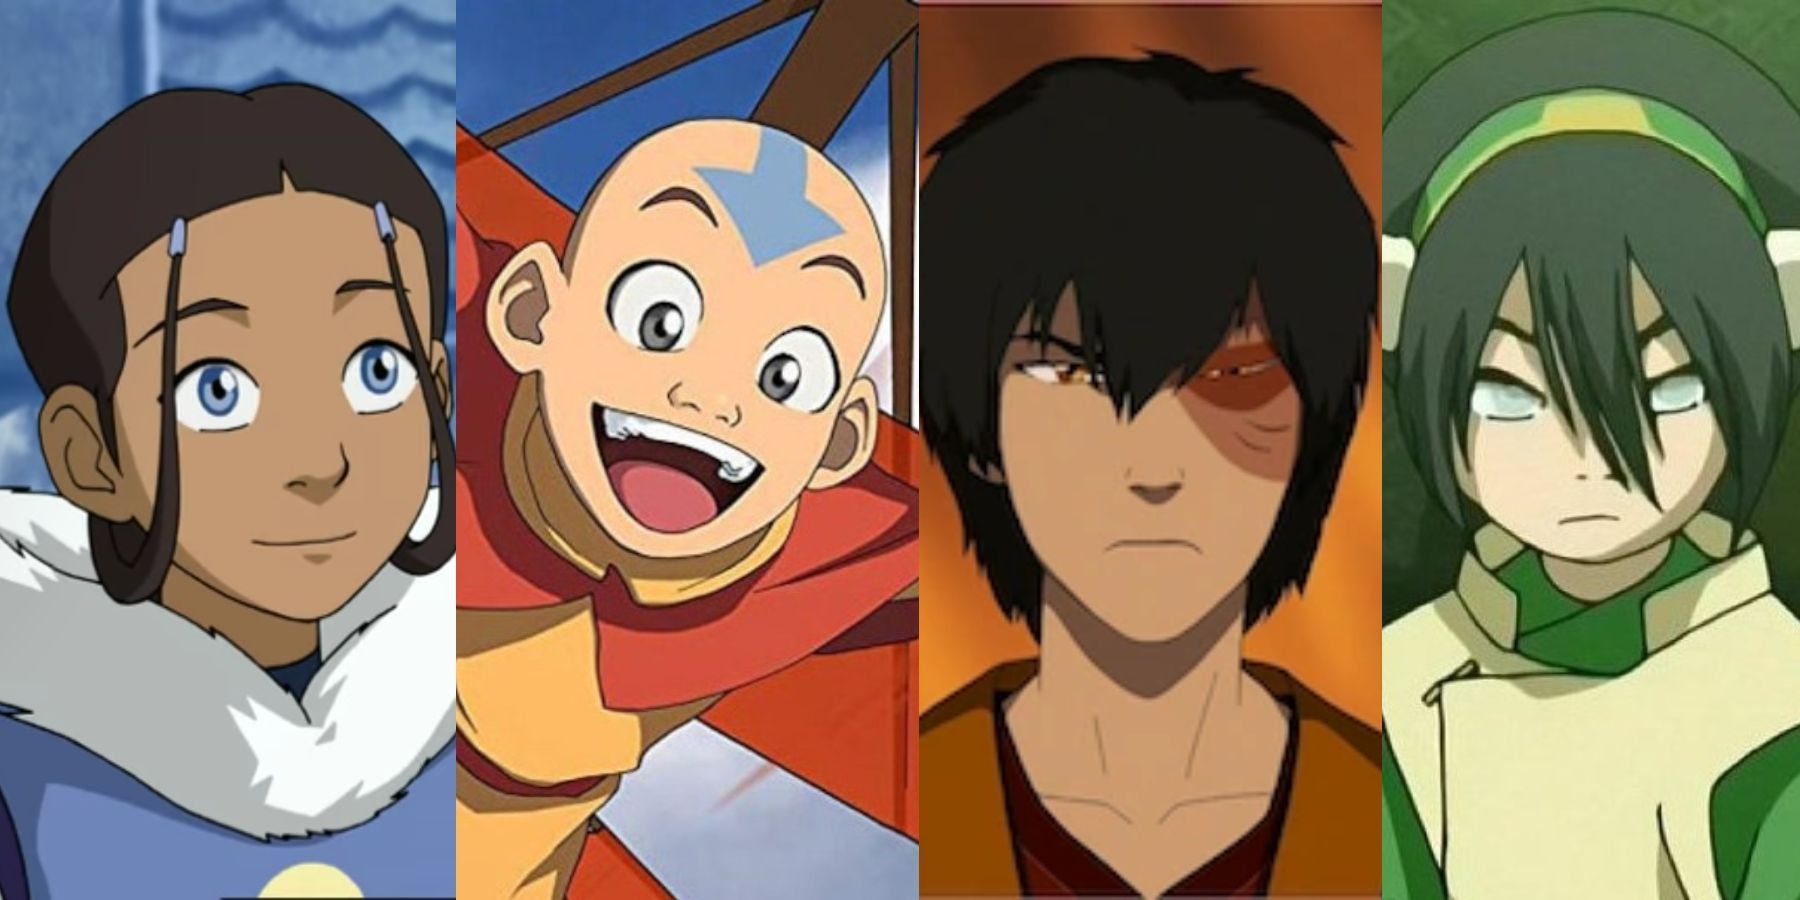 1 more day. Man it's amazing how much this show has impacted me #atla#... |  TikTok